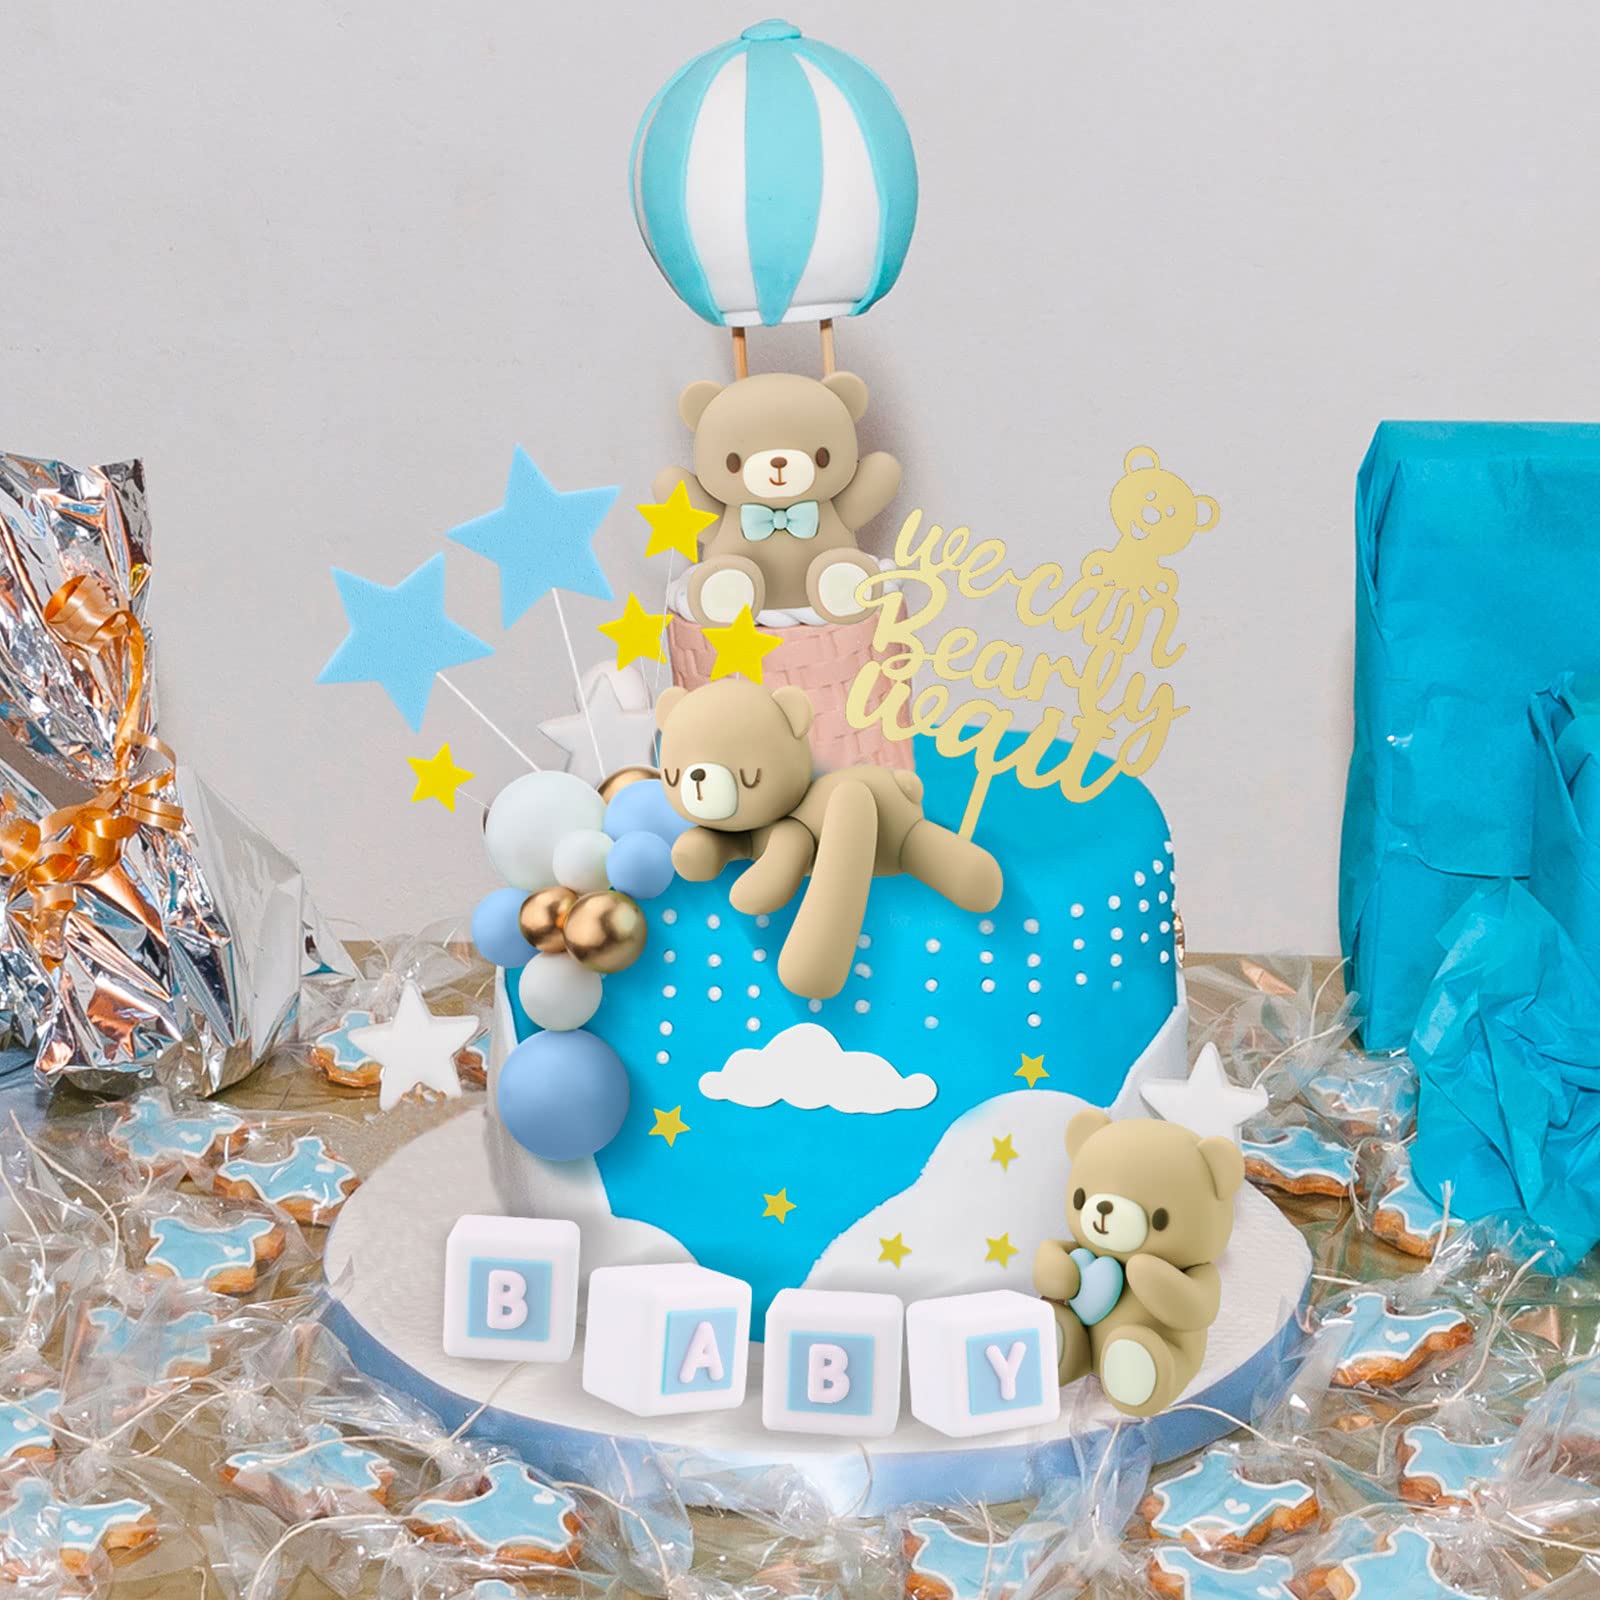 41 Pcs/Set Bear Cake Toppers Mini Bear Cake Decorations Cake Toppers Gold White Pearl Ball for Boy Girl Baby Shower Birthday Party Decorations(Blue, Brown, Cute Style)